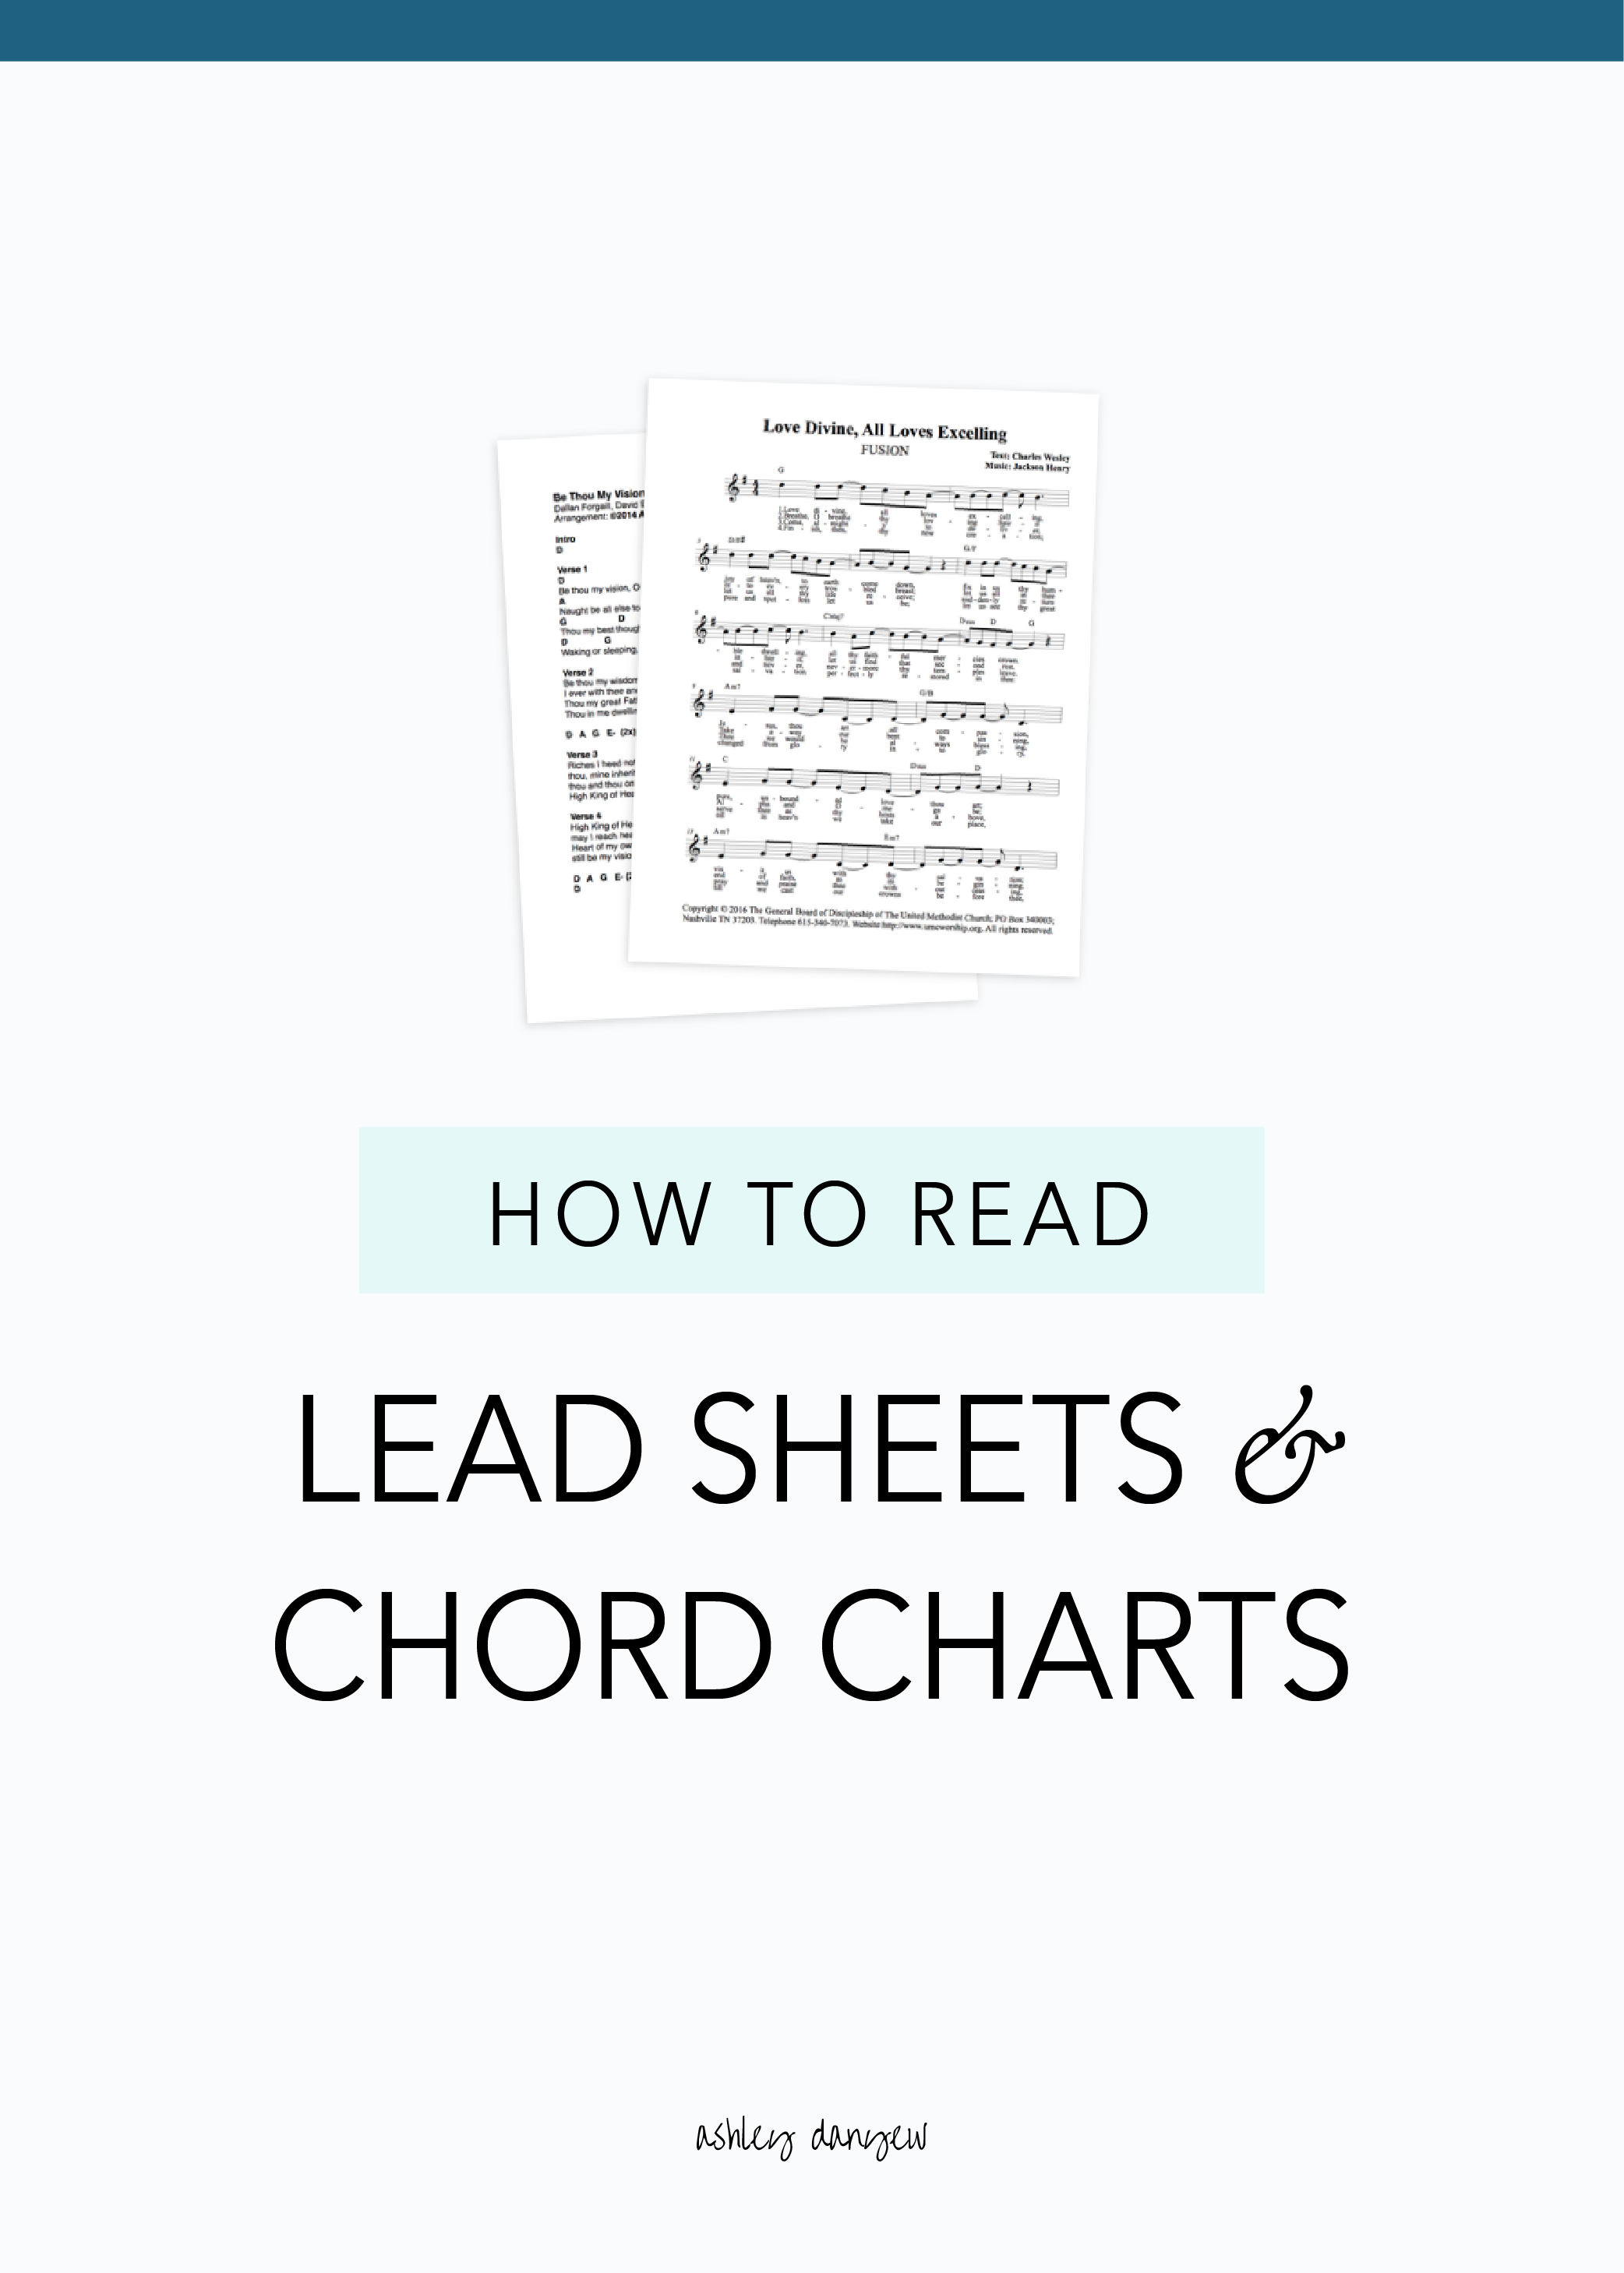 How to Read Lead Sheets and Chord Charts